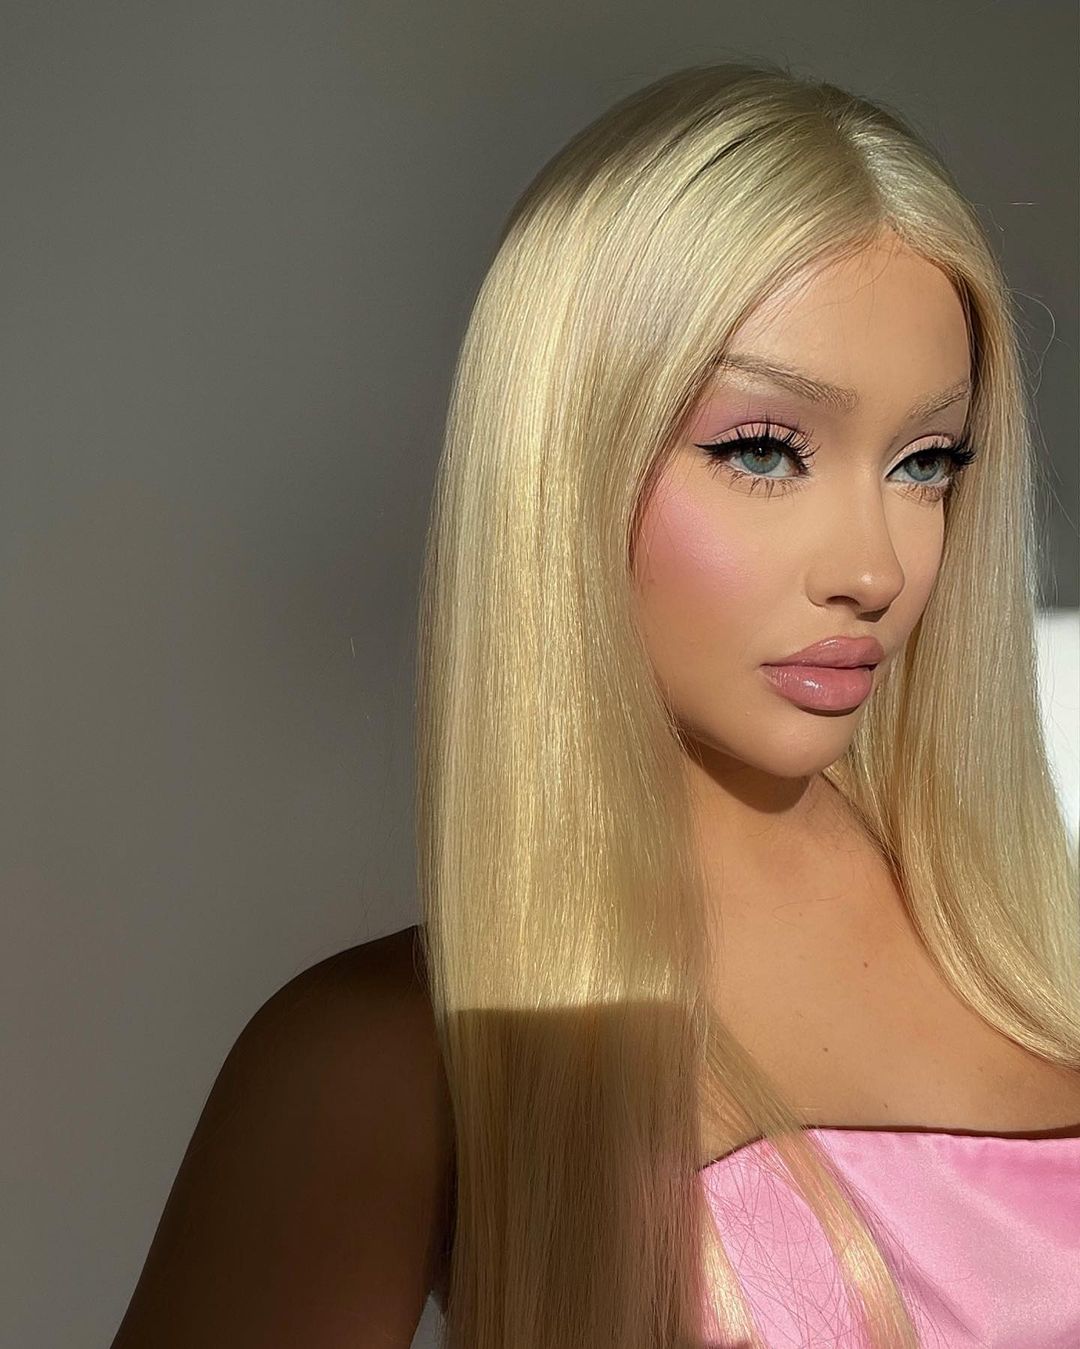 Think Pink With The Barbie Makeup Trend